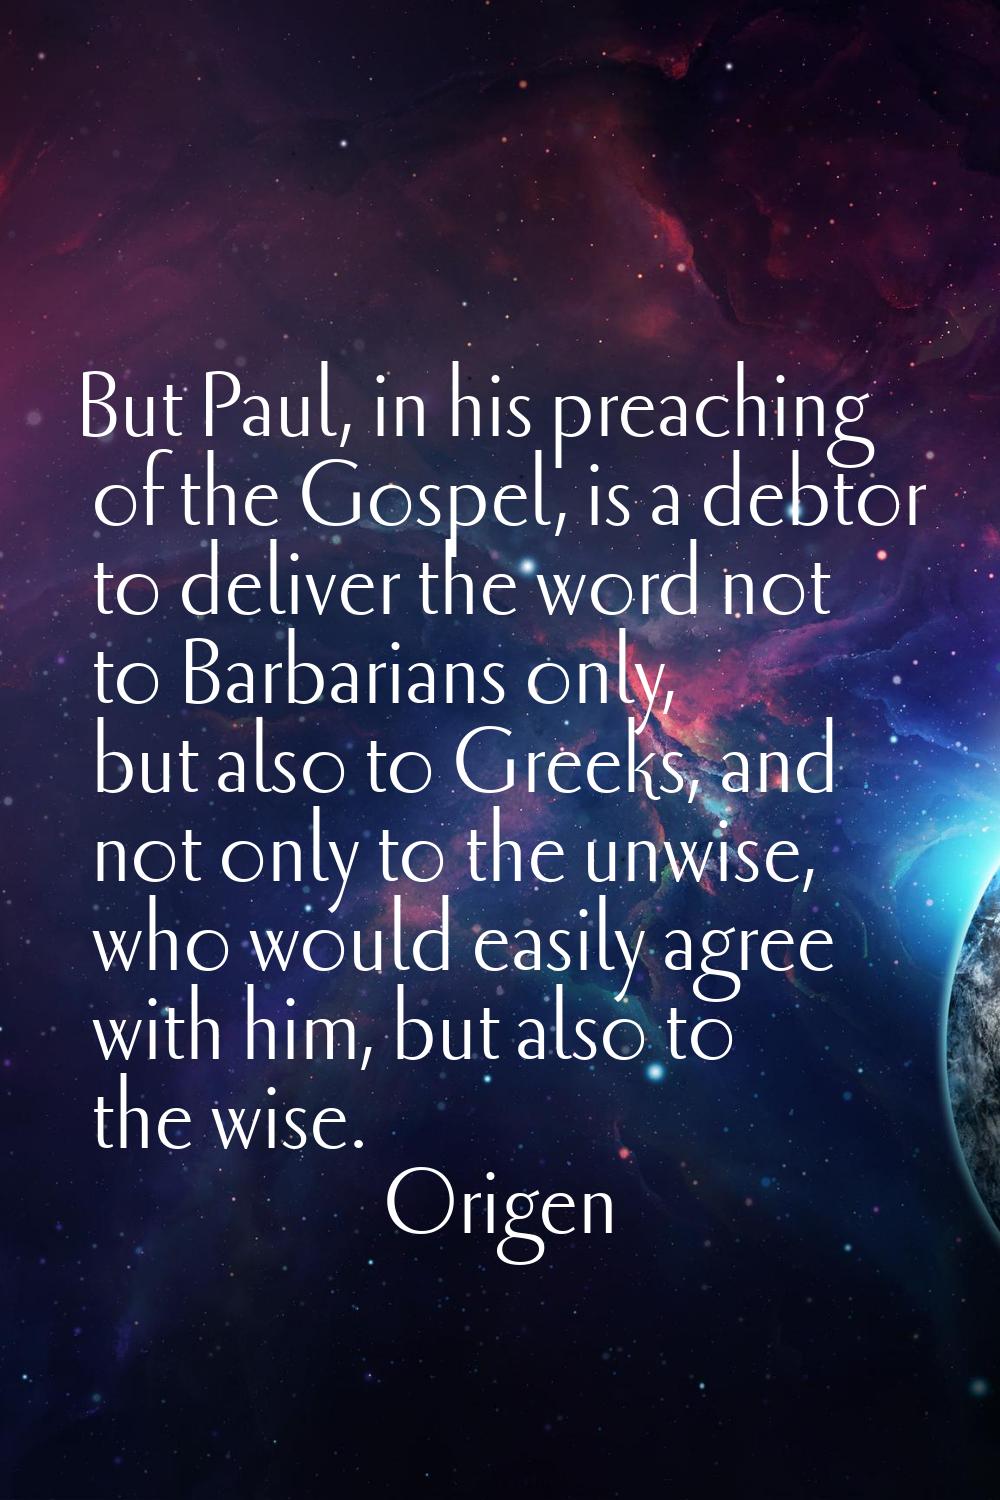 But Paul, in his preaching of the Gospel, is a debtor to deliver the word not to Barbarians only, b